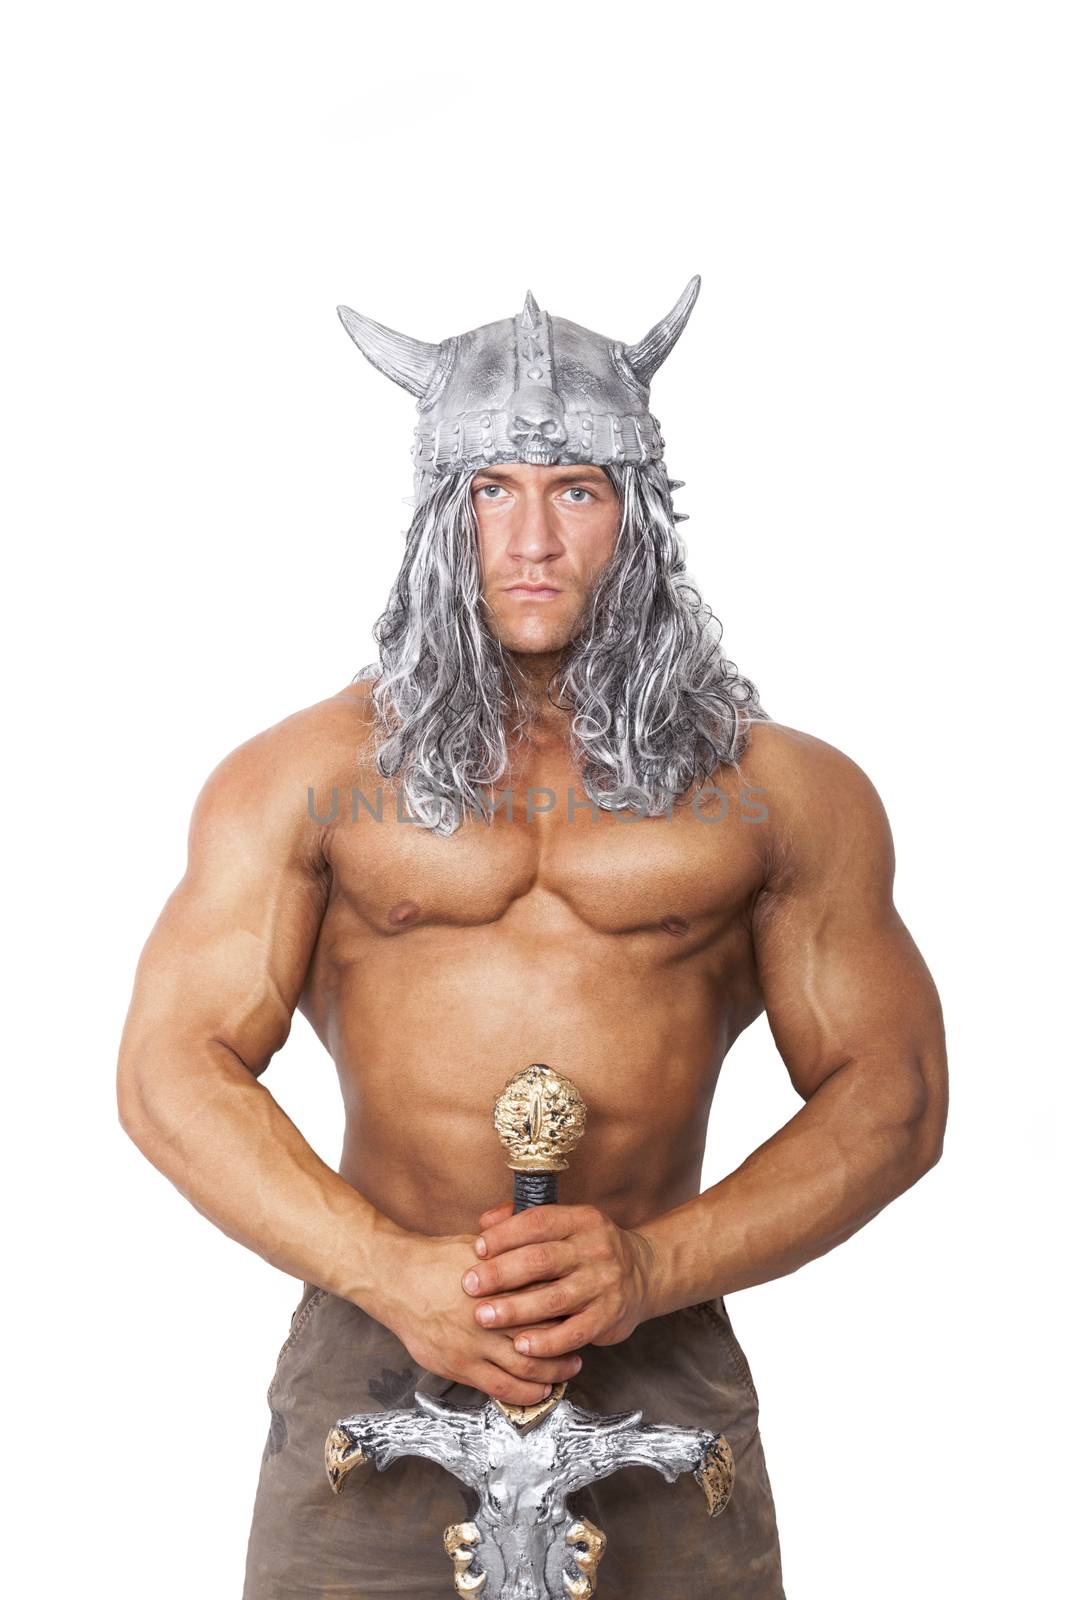 Handsome sexy muscular man as Conan the barbarian. Medieval strong warrior with sword isoalted on white background.